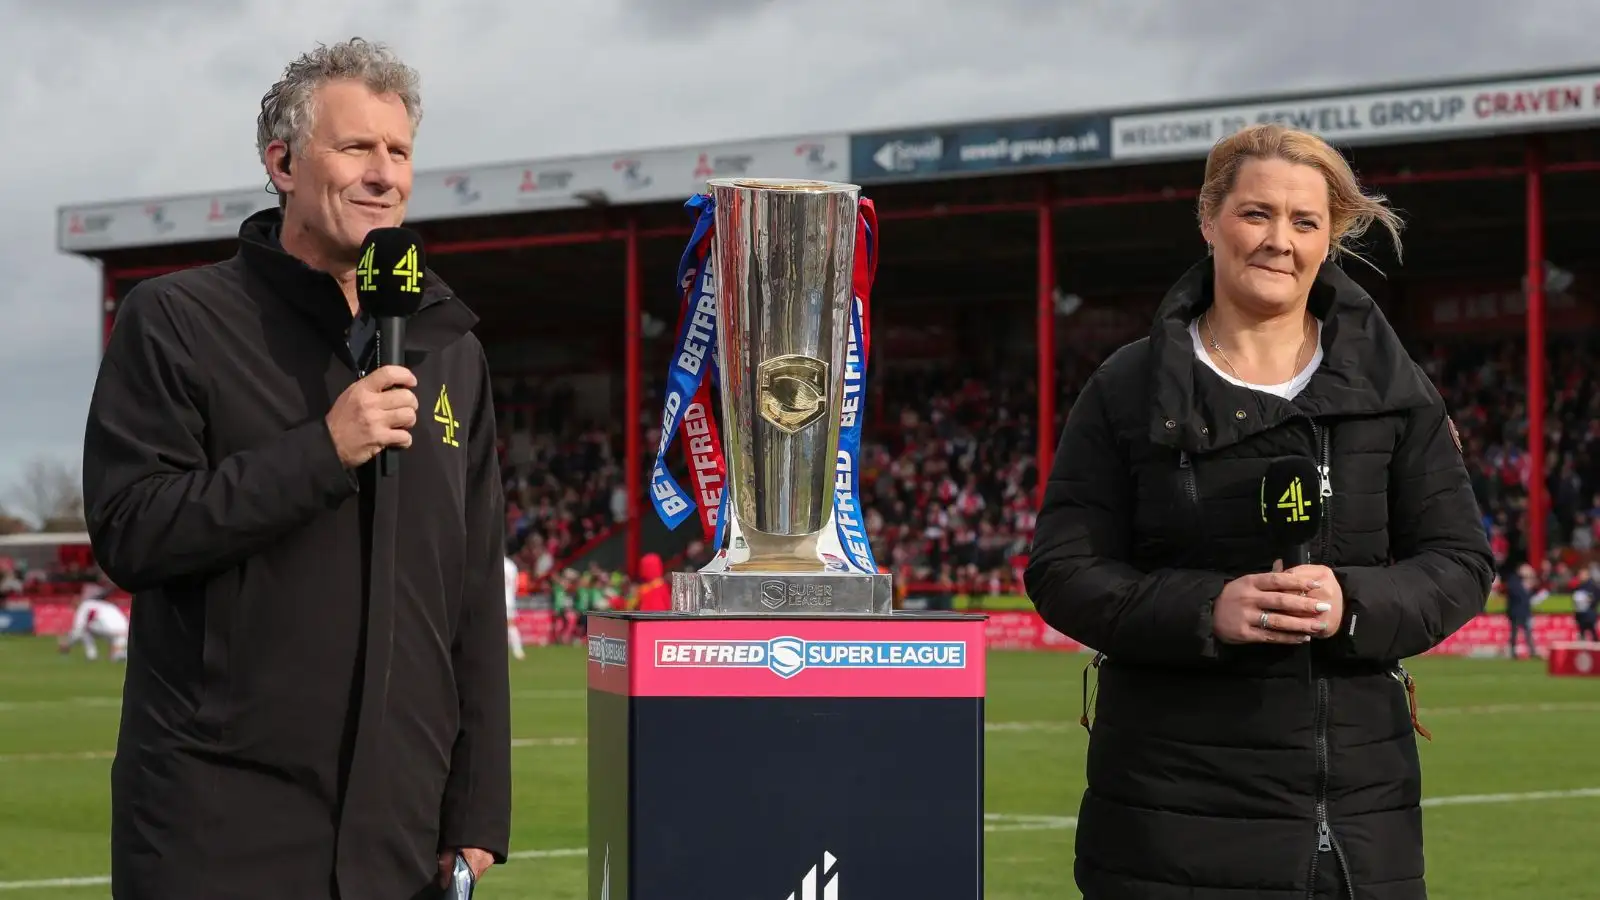 TV deal Q&A: Weekly Channel 4 fixtures, Our League future & how Super League clubs have reacted